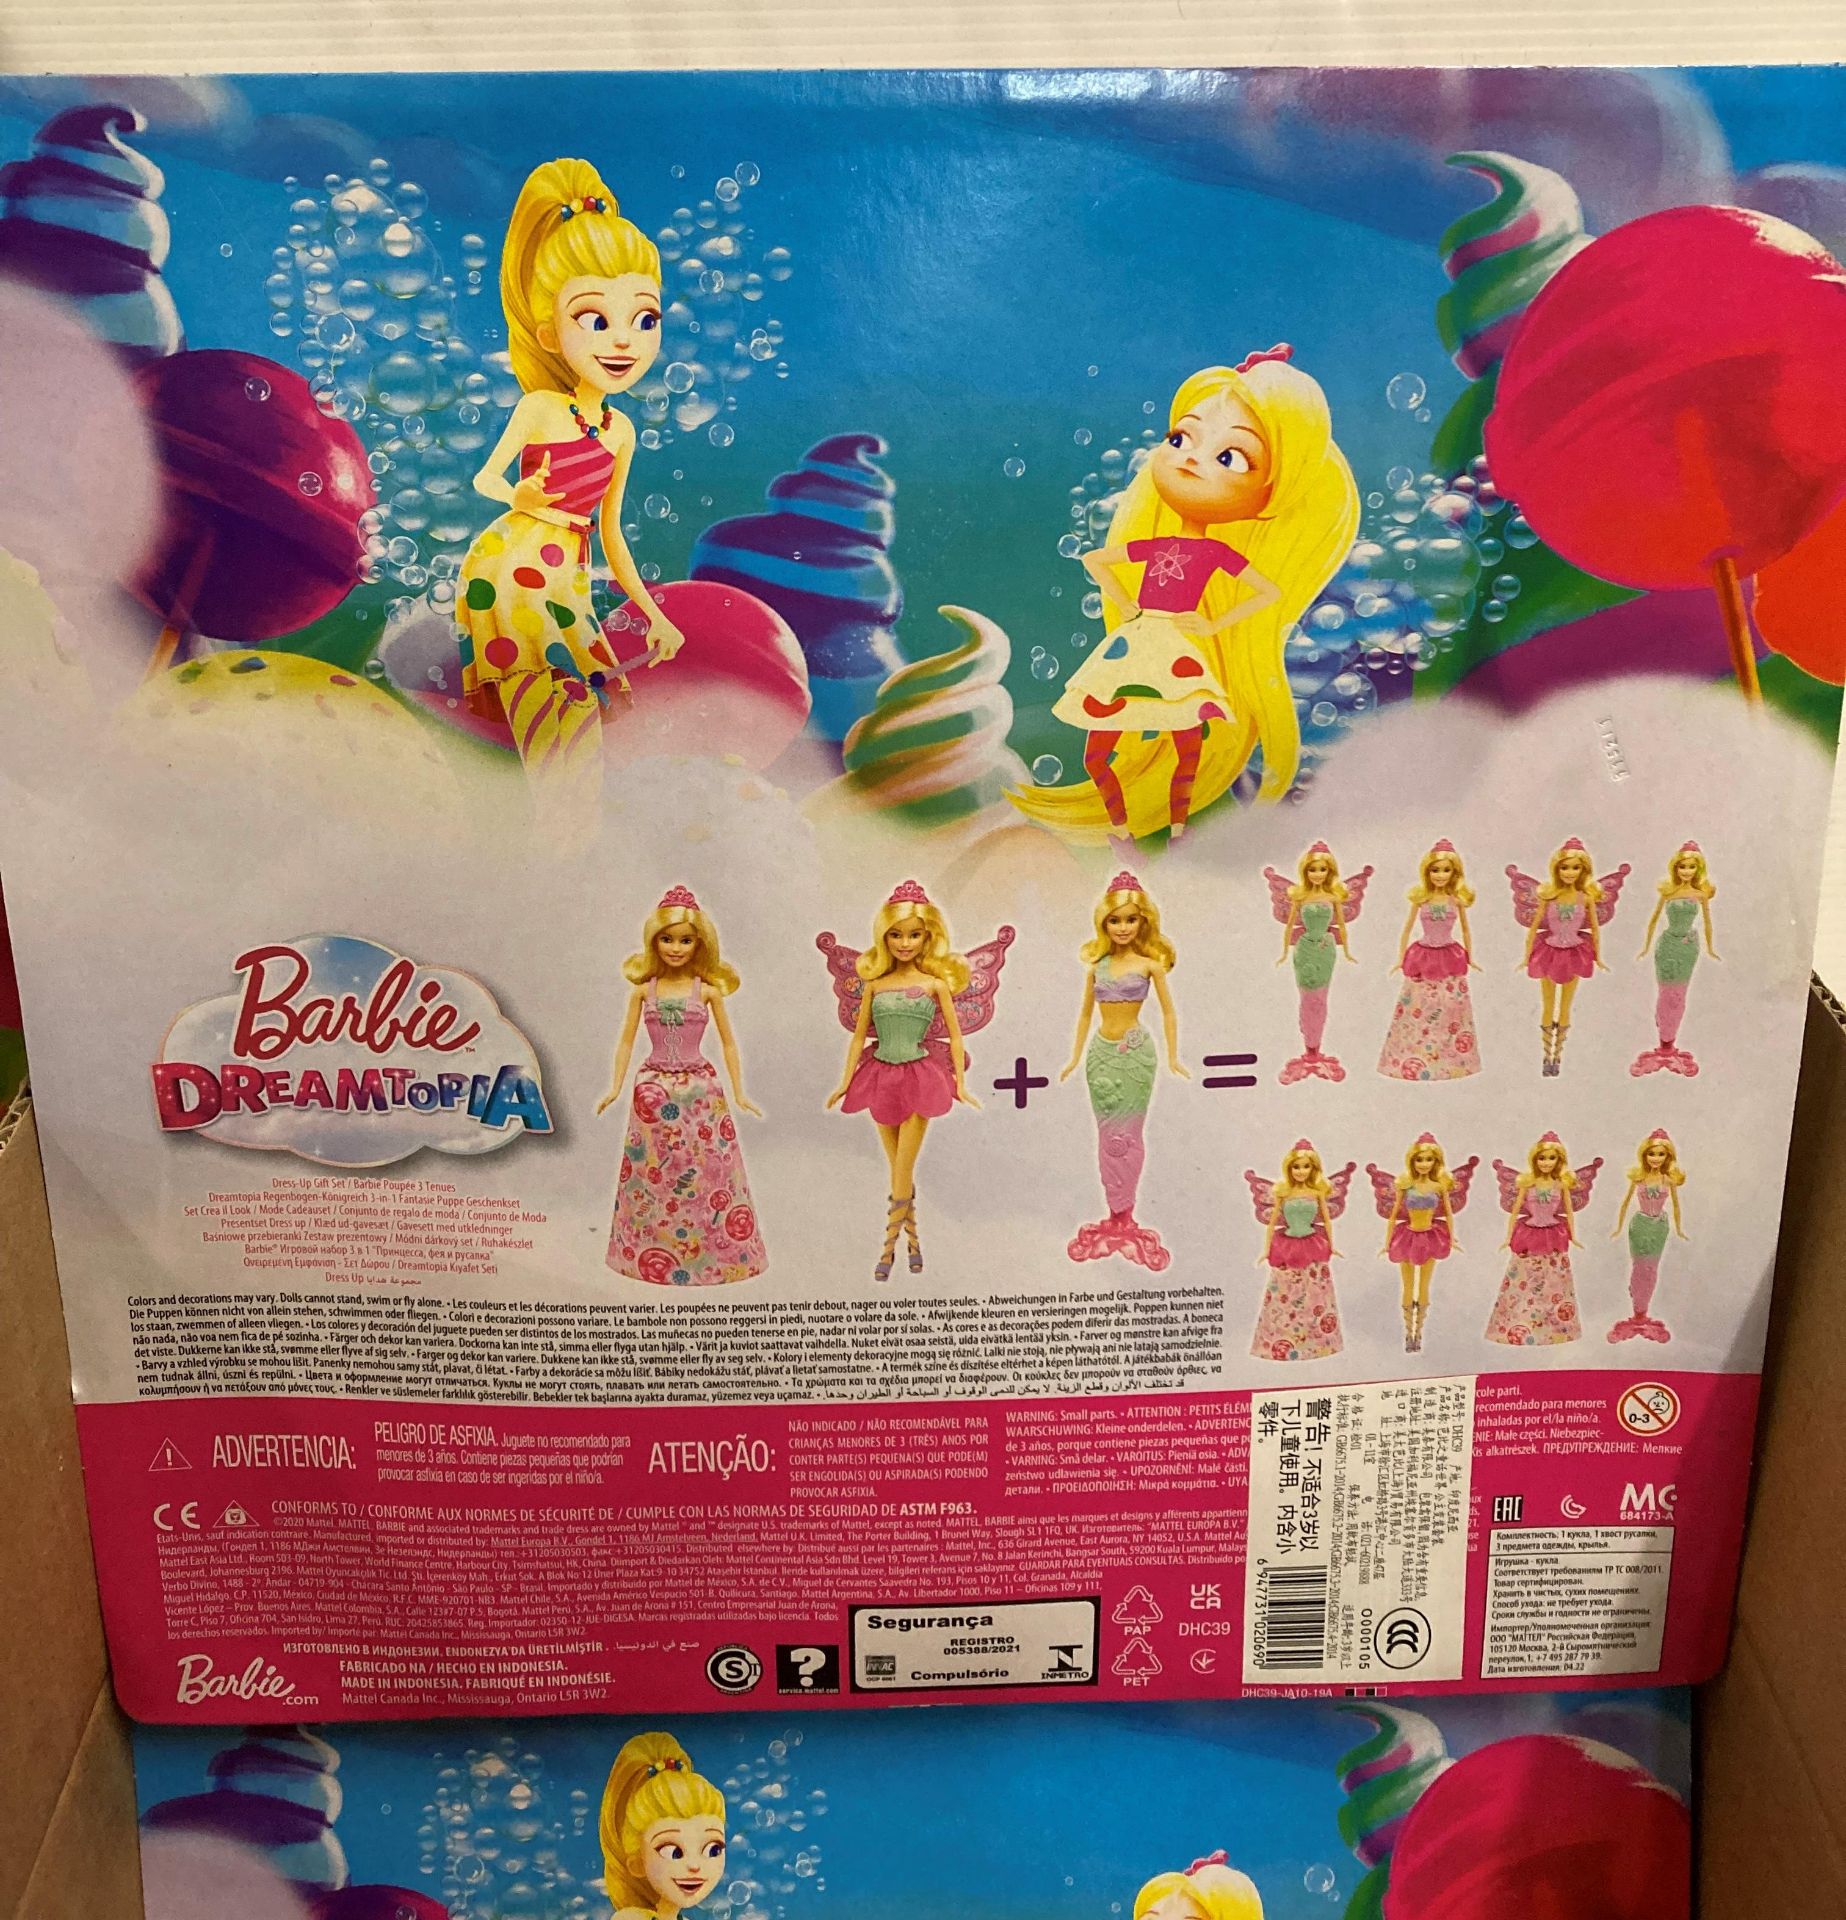 7 x Barbie Dreamtopia doll and accessories (2 x outer boxes) (saleroom location: M08) - Image 3 of 3